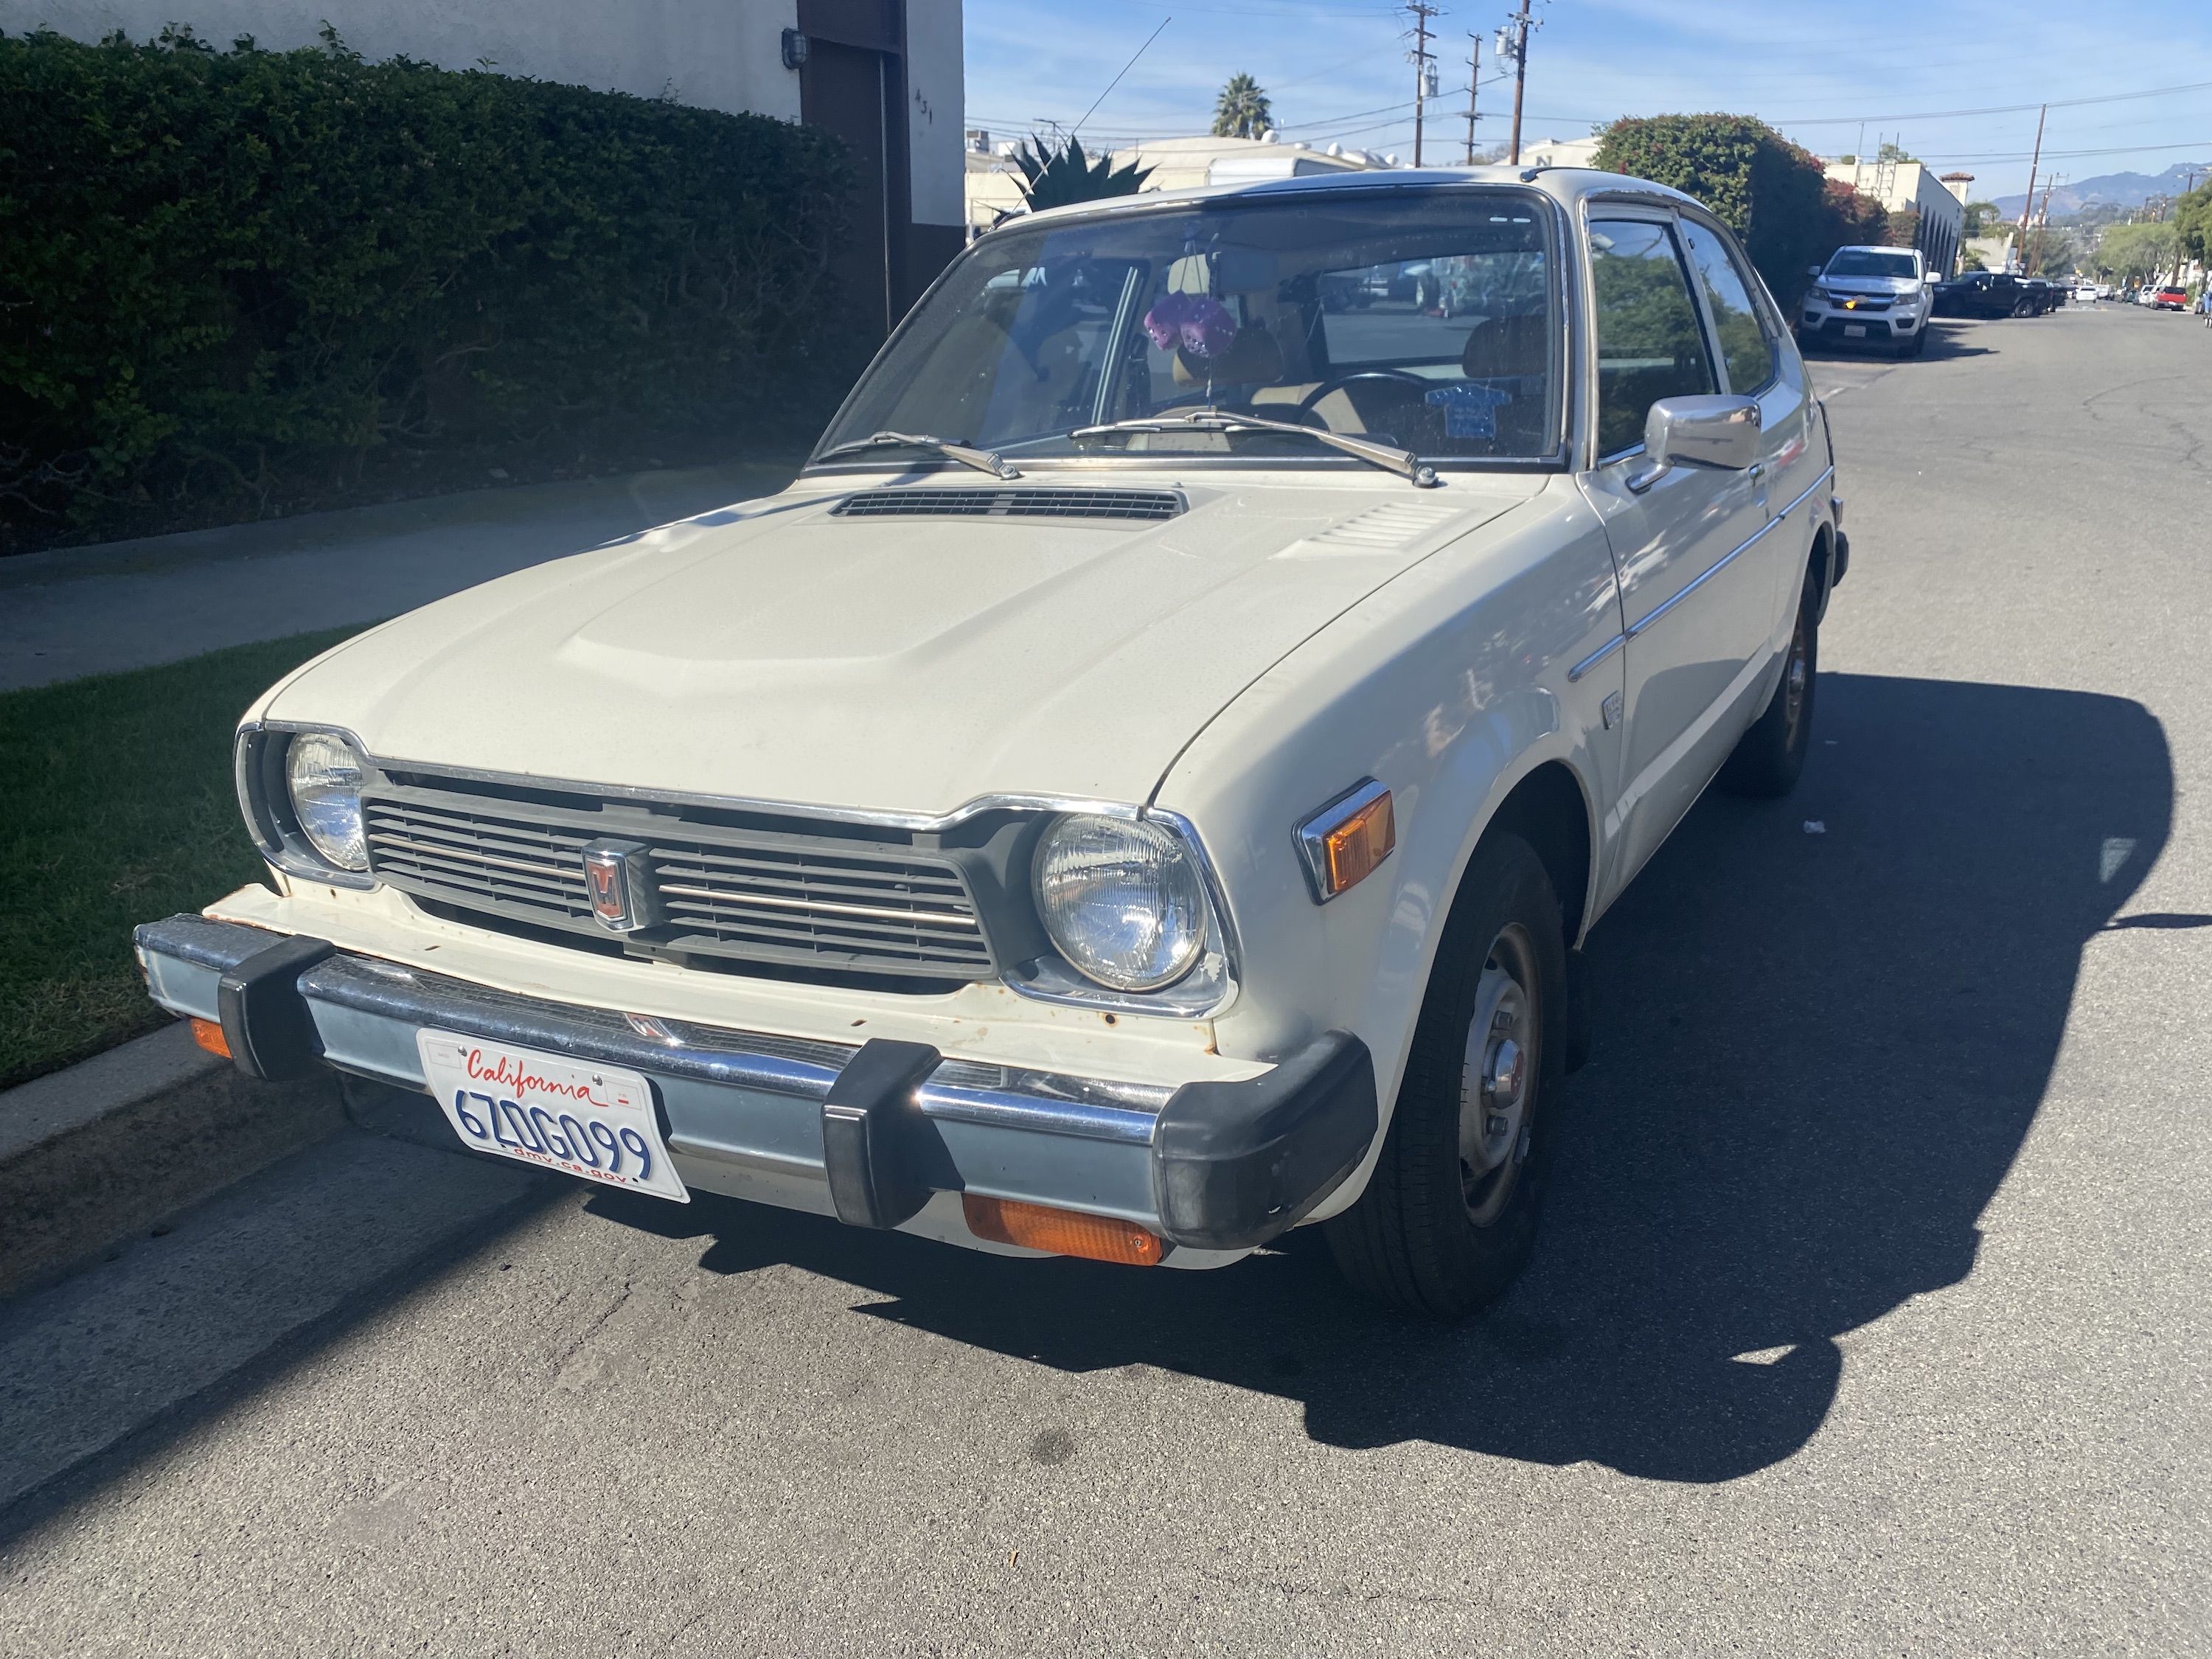 The First-Generation Honda Civic Changed the World